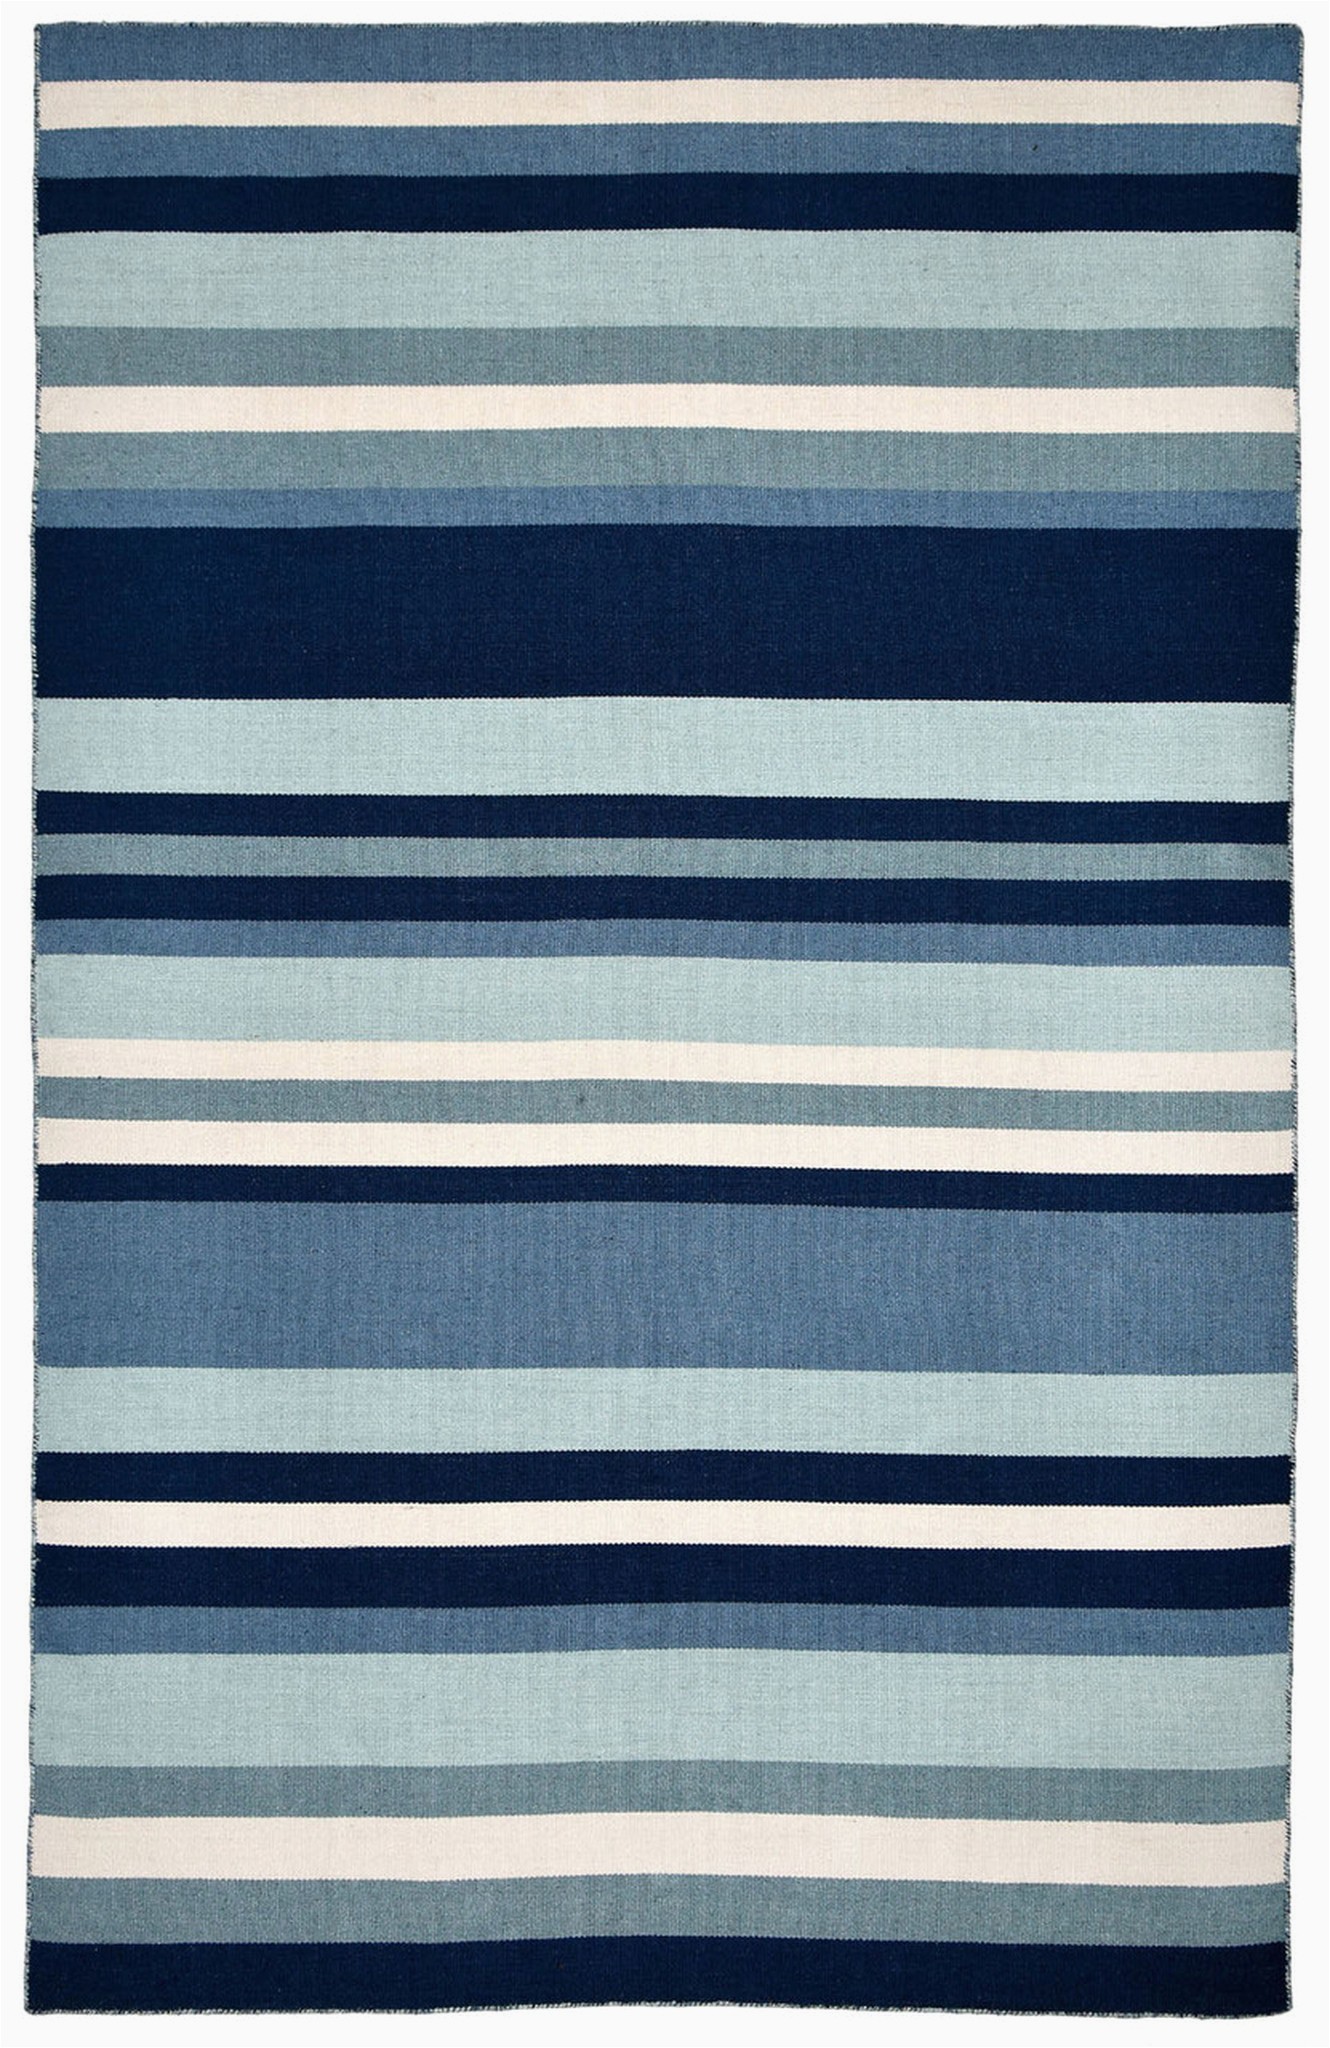 Navy Blue Striped area Rug Tribeca Water Blue Striped Woven Indoor Outdoor Rug